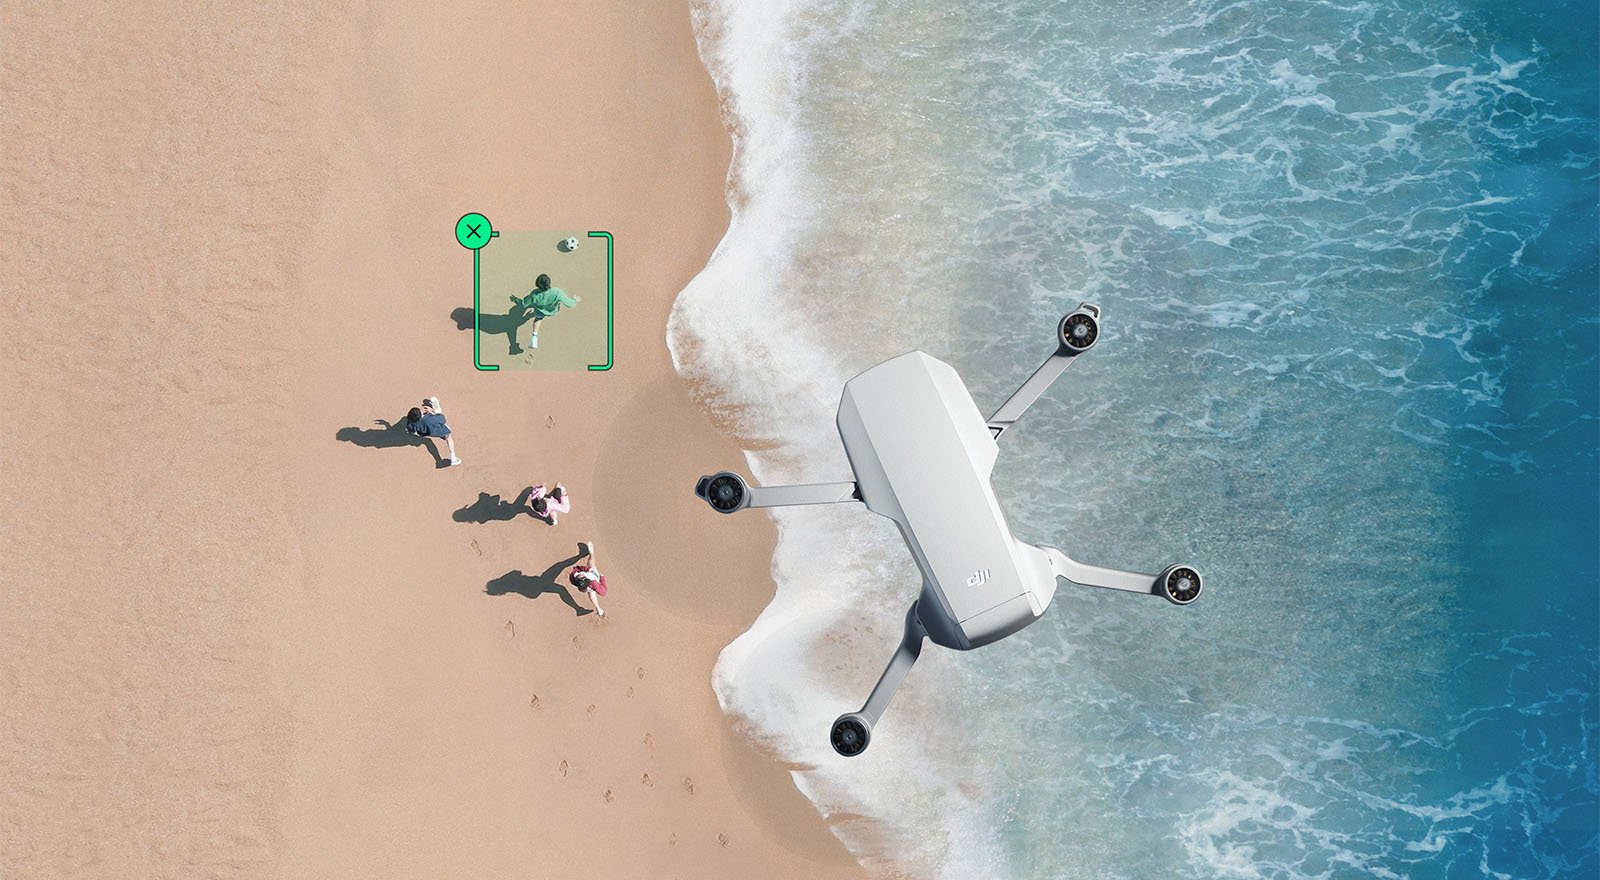 An aerial view of a sandy beach with waves gently lapping at the shore. a large drone is positioned on the sand, surrounded by people looking at it. a person sits on a green mat nearby, operating the drone.